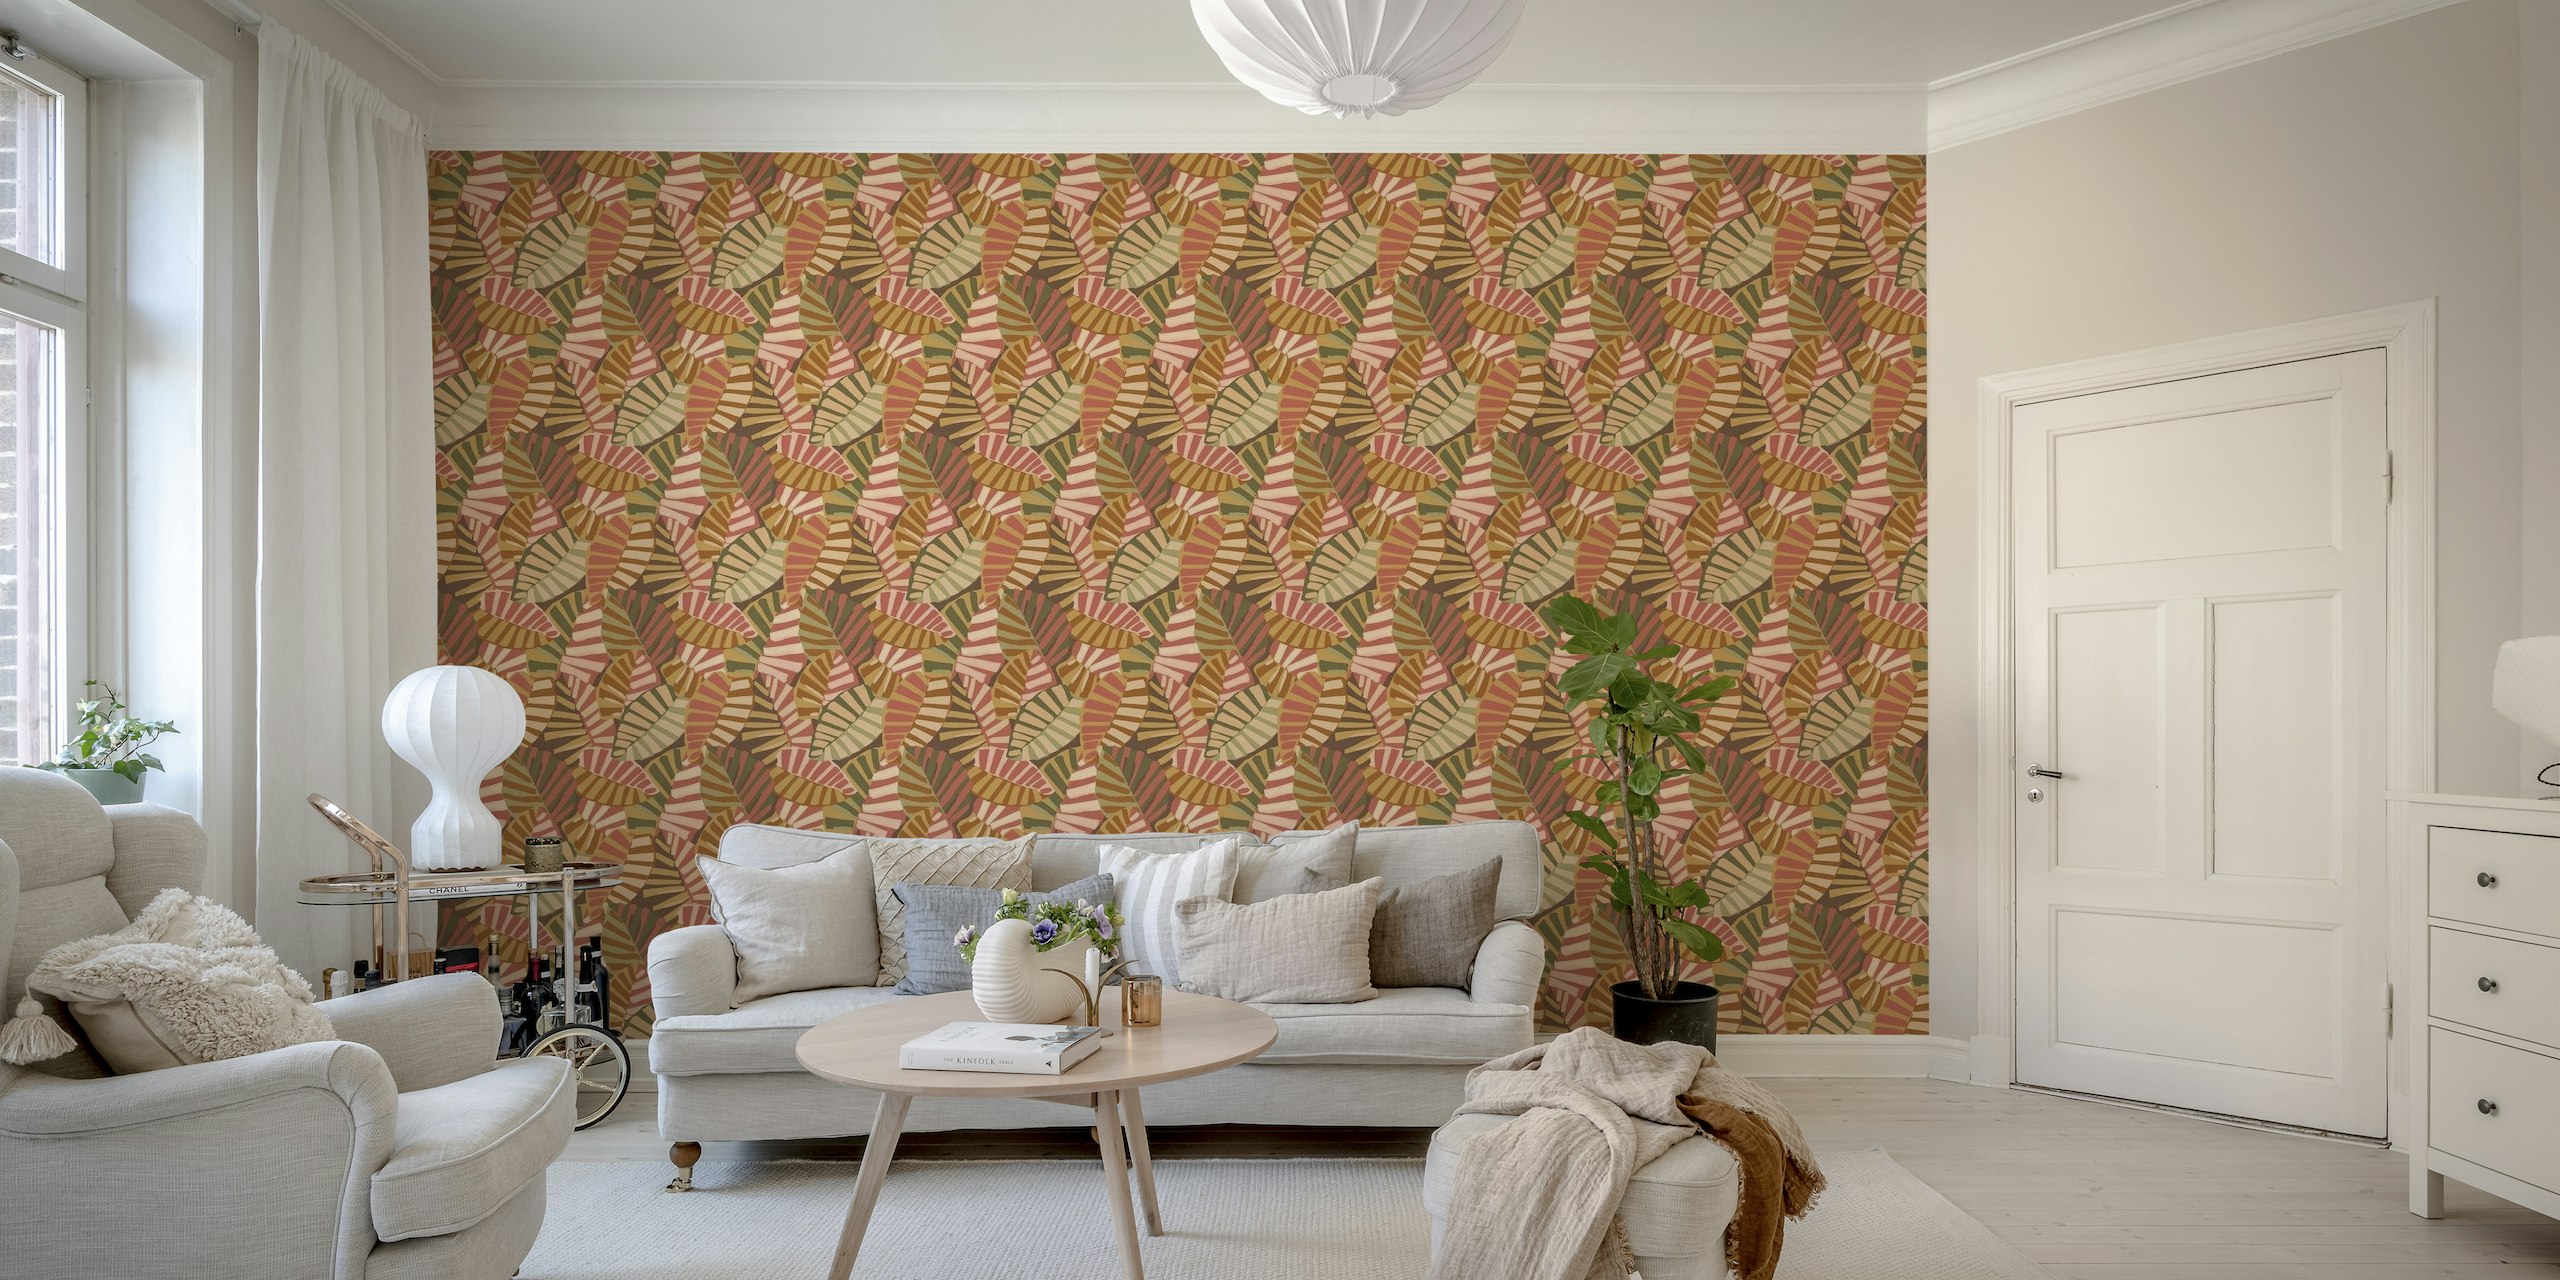 Foliage pattern wall mural in earth tones with stylized leaf designs